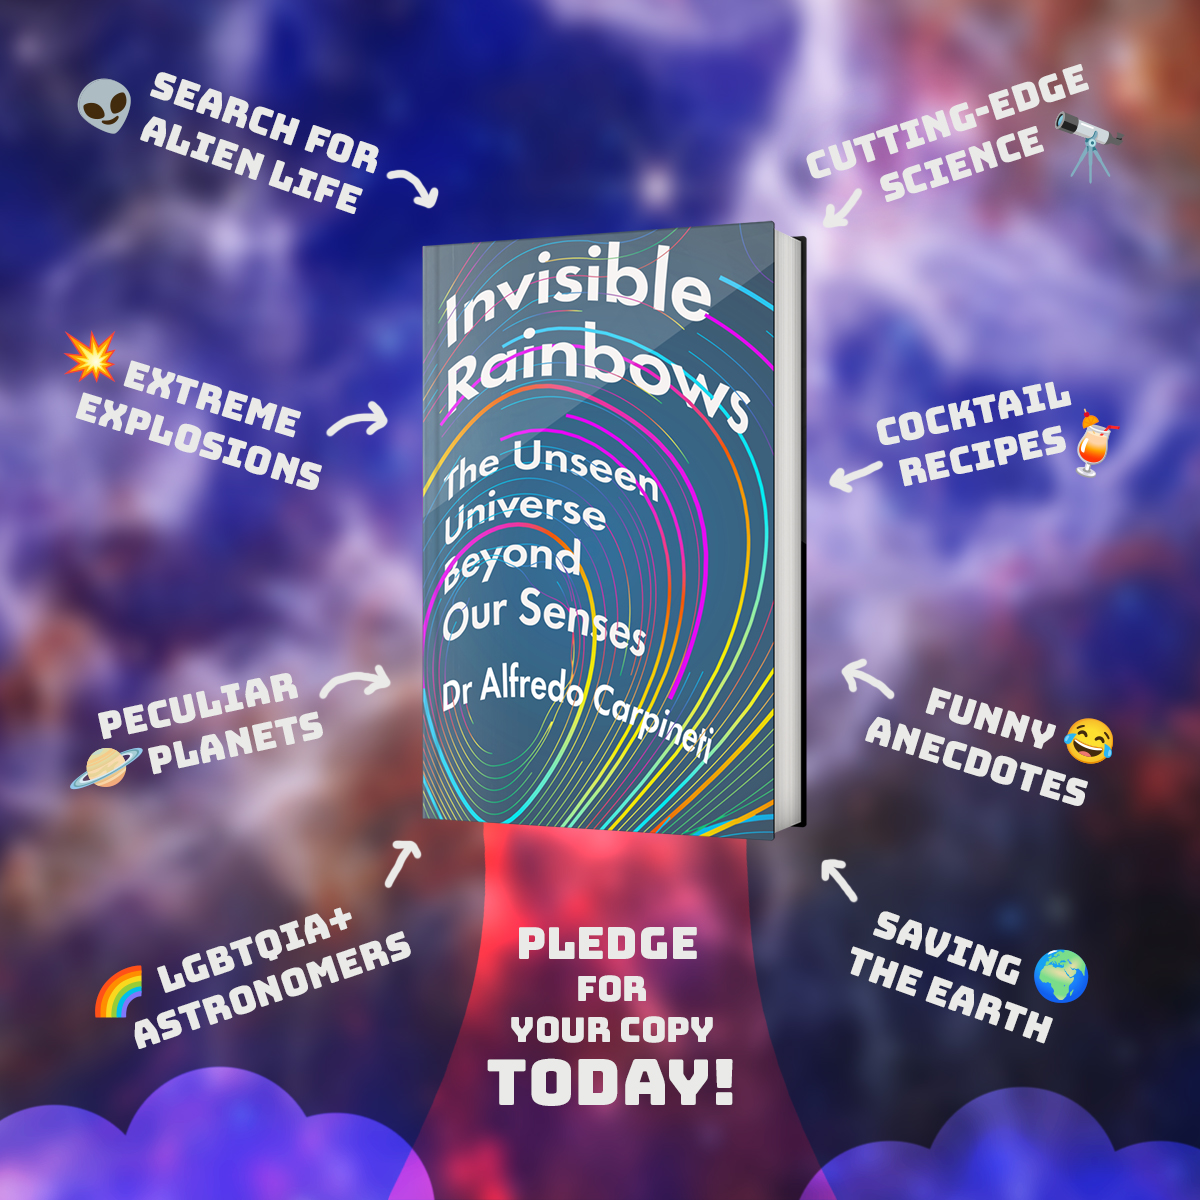 It's #WorldBookDay so why not consider pledging for a copy of my book Invisible Rainbows, which is currently crowdfunding on @unbounders! It's got everything from cutting-edge astronomy to keeping us safe from space threats (with some cocktails too)! unbound.com/books/invisibl…